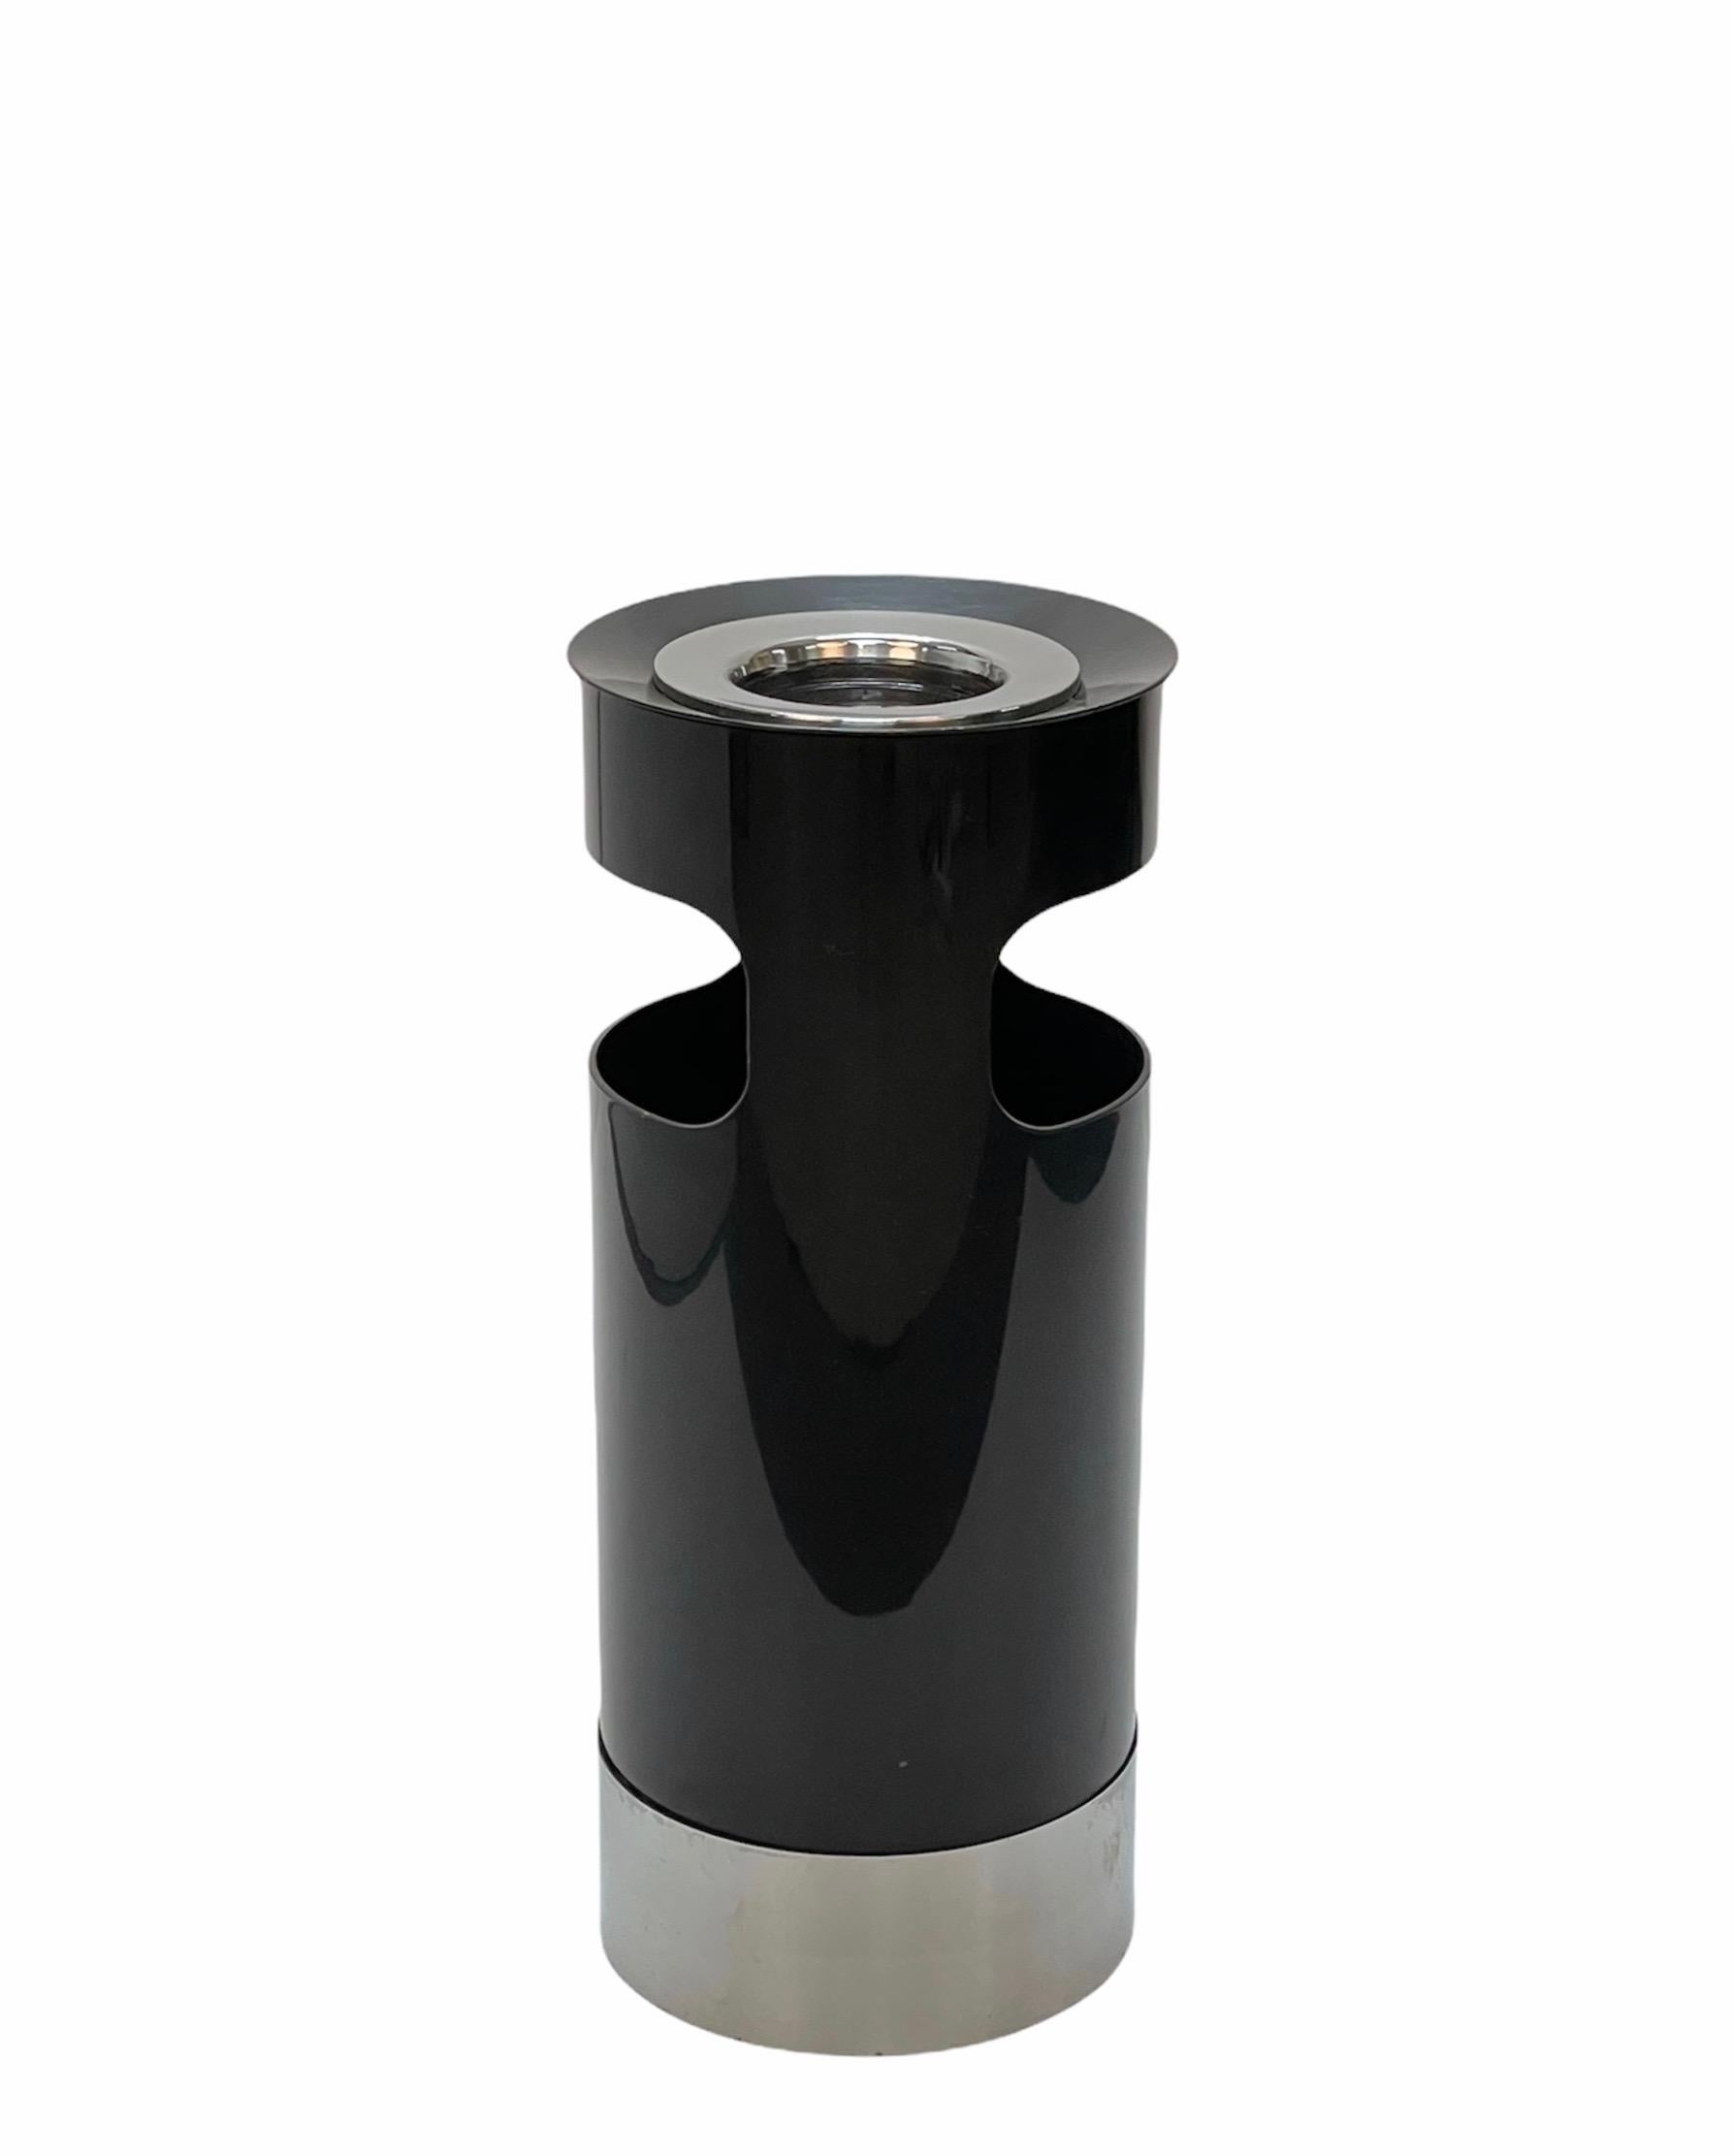 Gino Colombini Midcentury Black Umbrella Stands or Ashtray for Kartell, 1970 For Sale 5